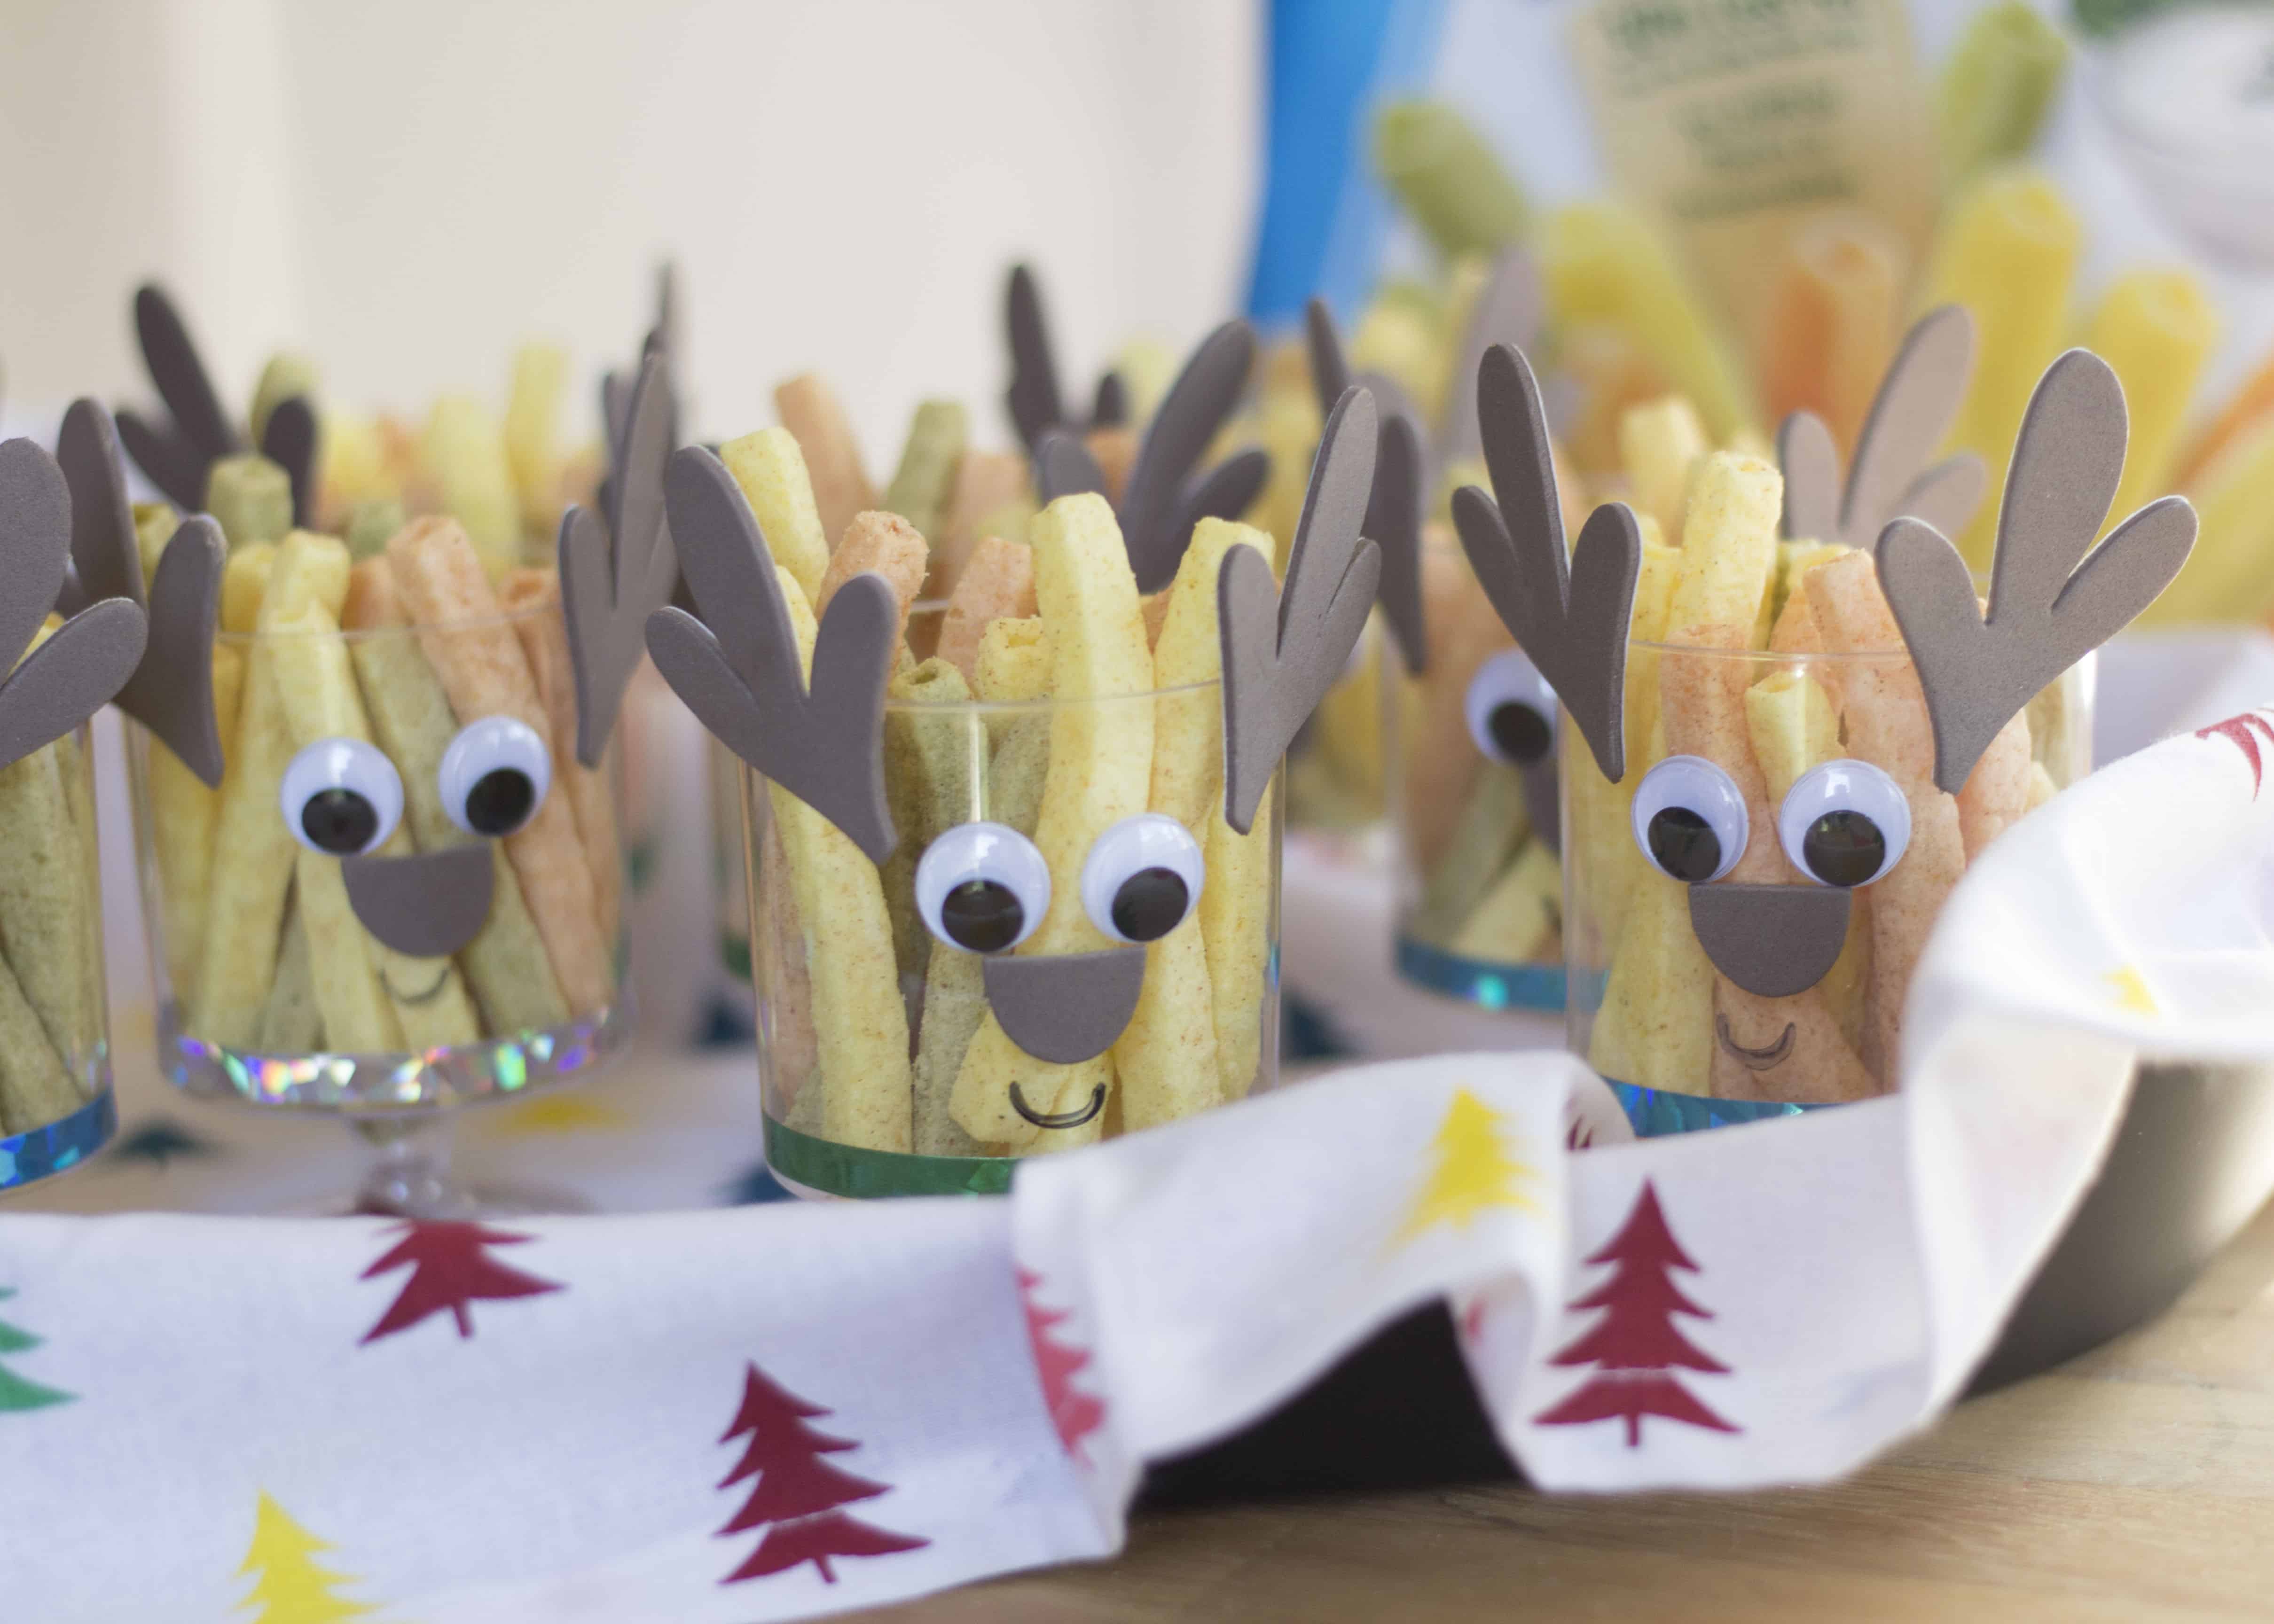 Reindeer treat cups - The Craft Train